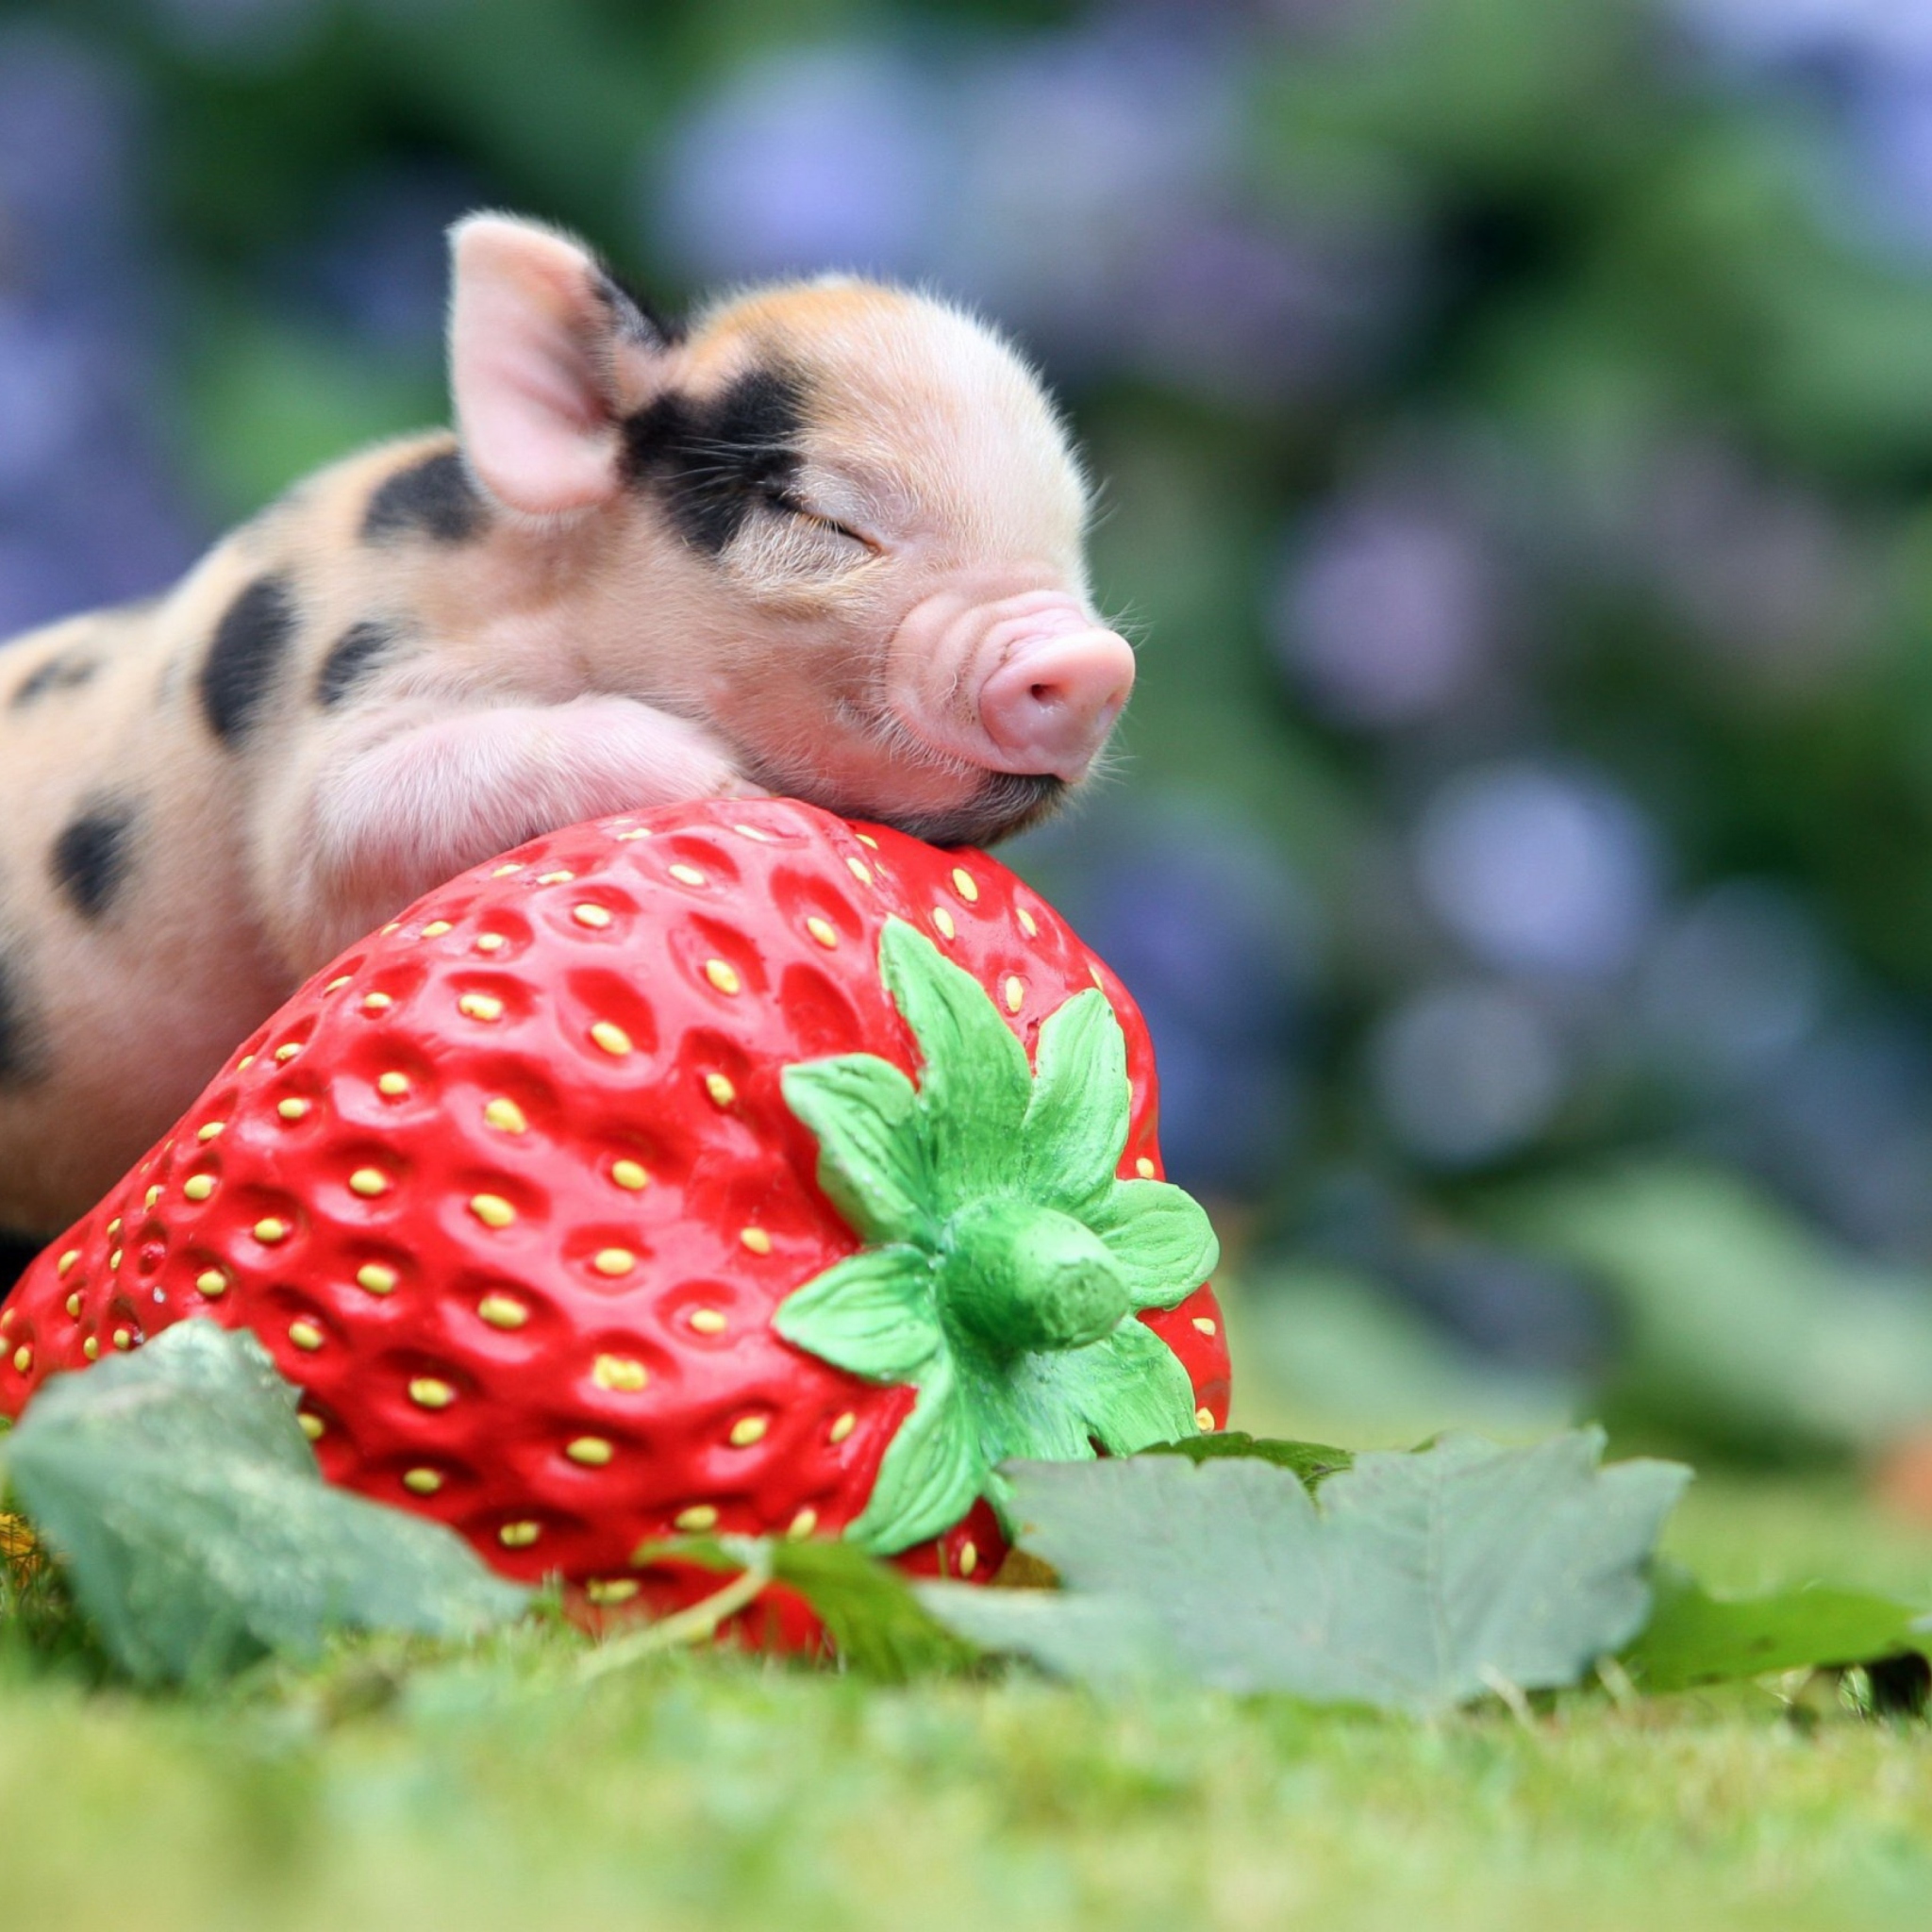 Cute Little Piglet And Strawberry Wallpaper for iPad 3.